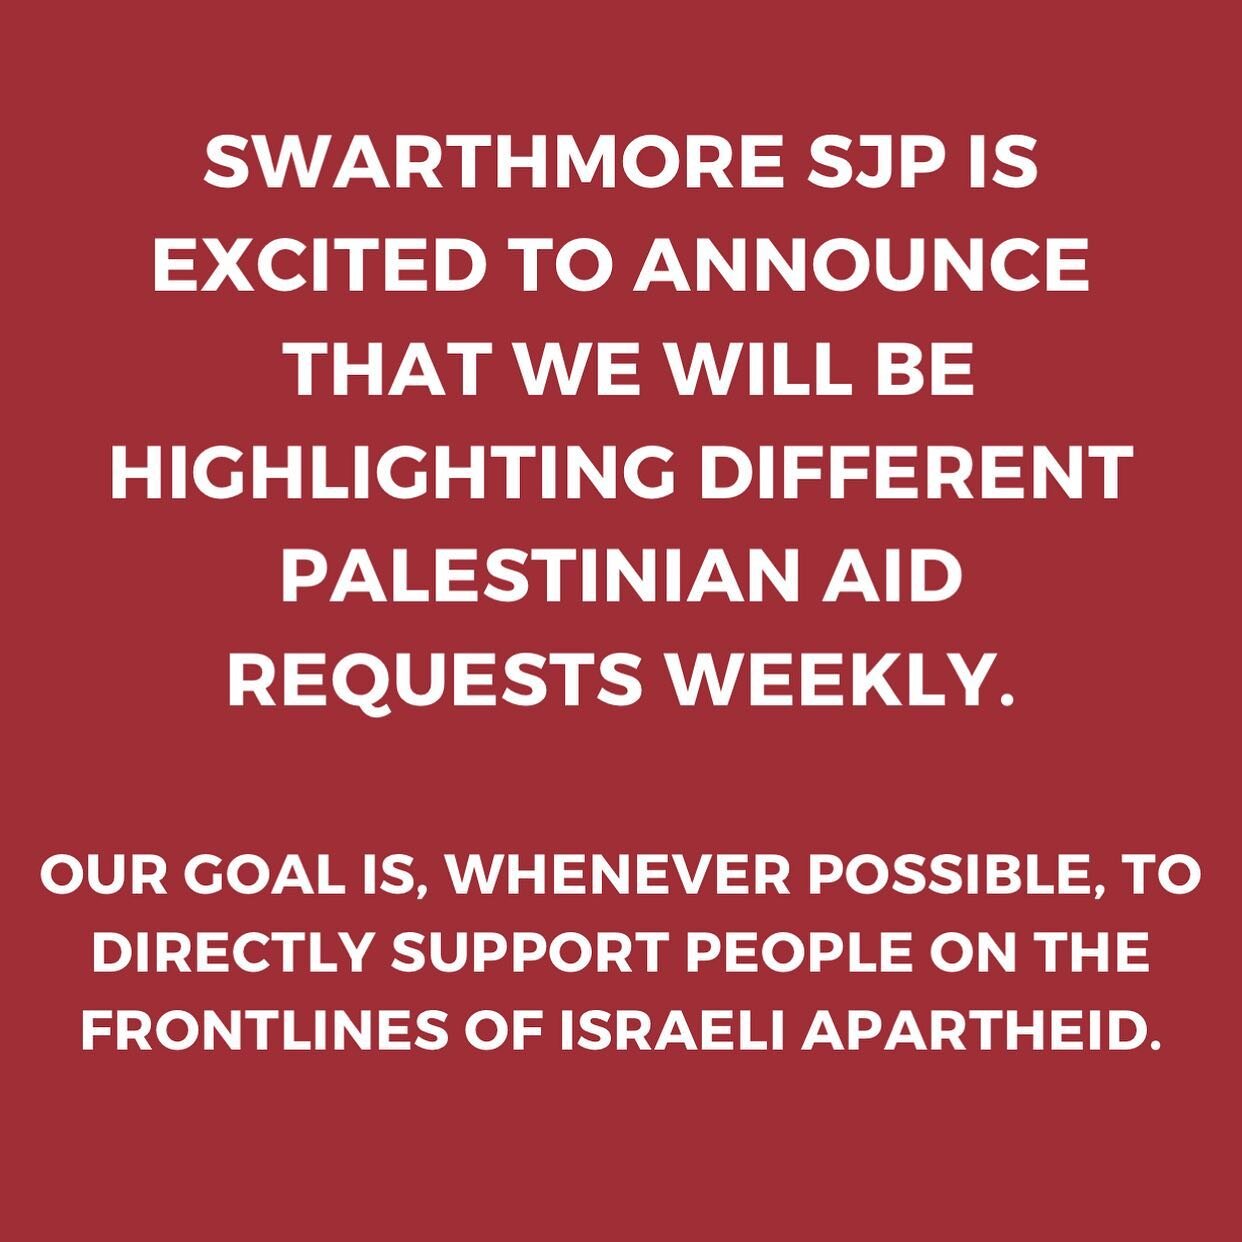 Our first of many fundraisers! See the slides above to donate to a Palestinian family in Gaza who is in need of economic support. The link to donate is in our bio. Stay tuned for future aid requests and fundraisers that we will be posting weekly!